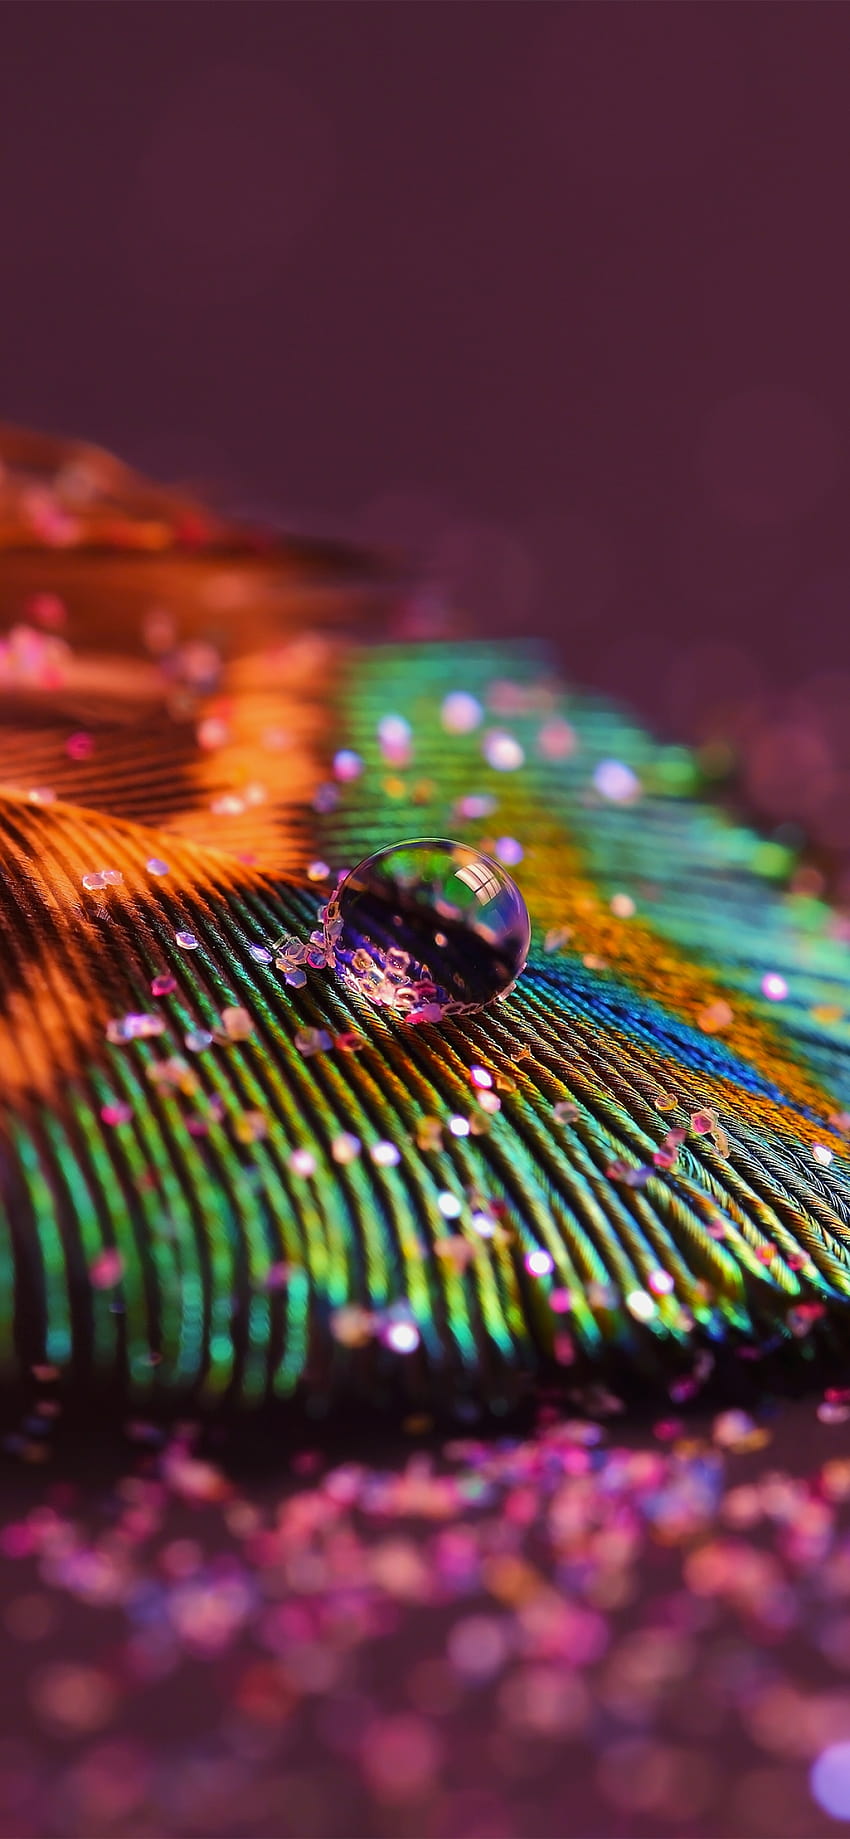 Peacock feather , Aesthetic, Water drop, Selective Focus, Macro, graphy, iphone krishna peacock feather HD phone wallpaper